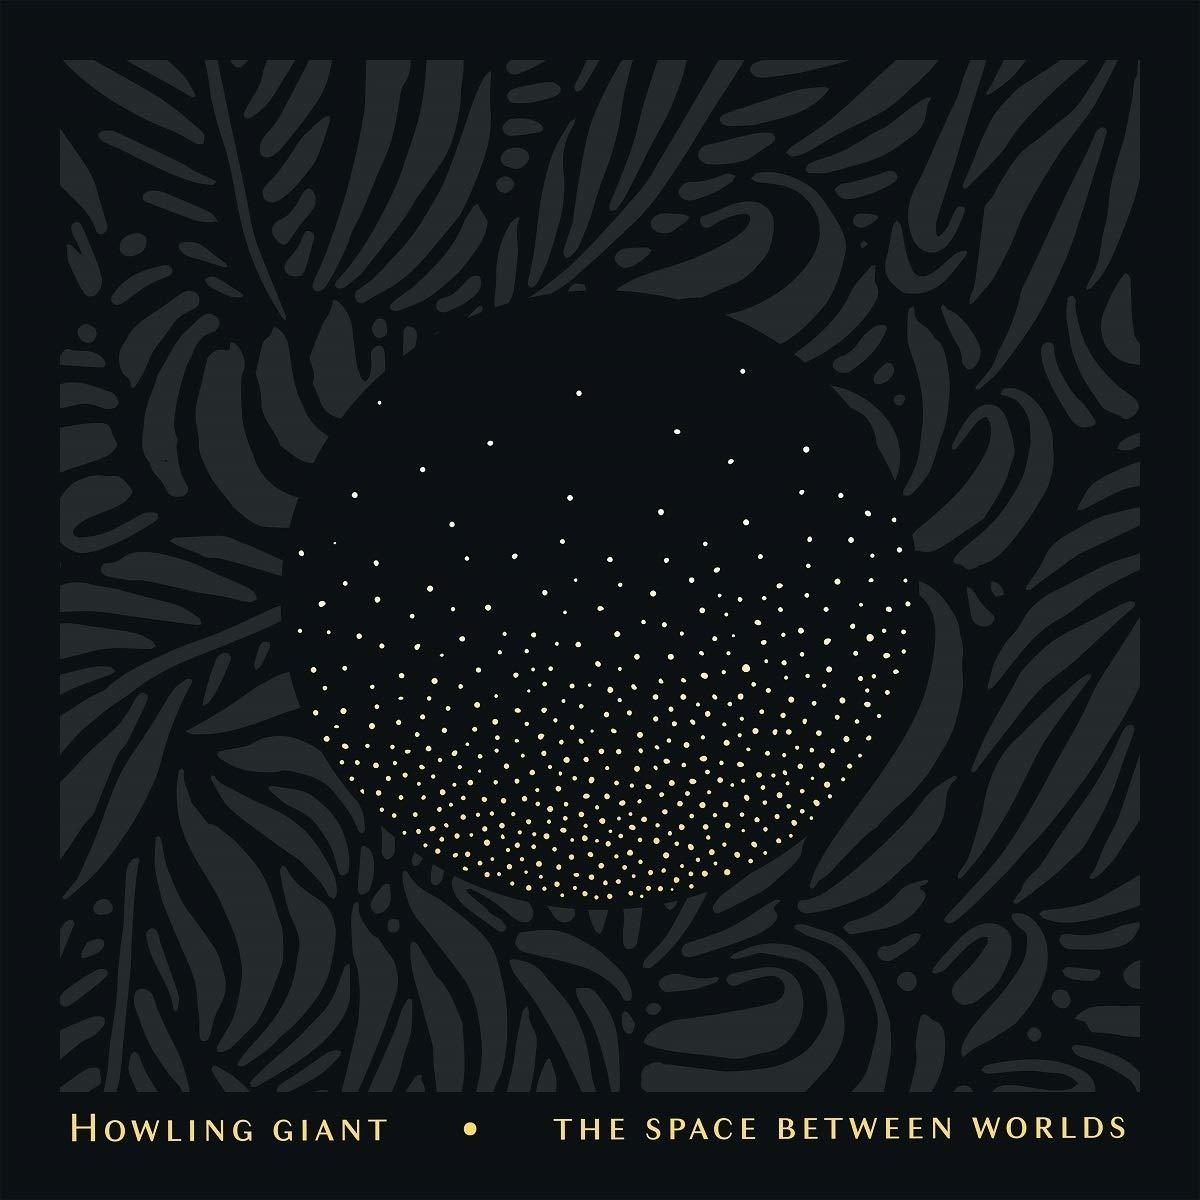 Howling - Space Giant The Worlds Between (CD) -